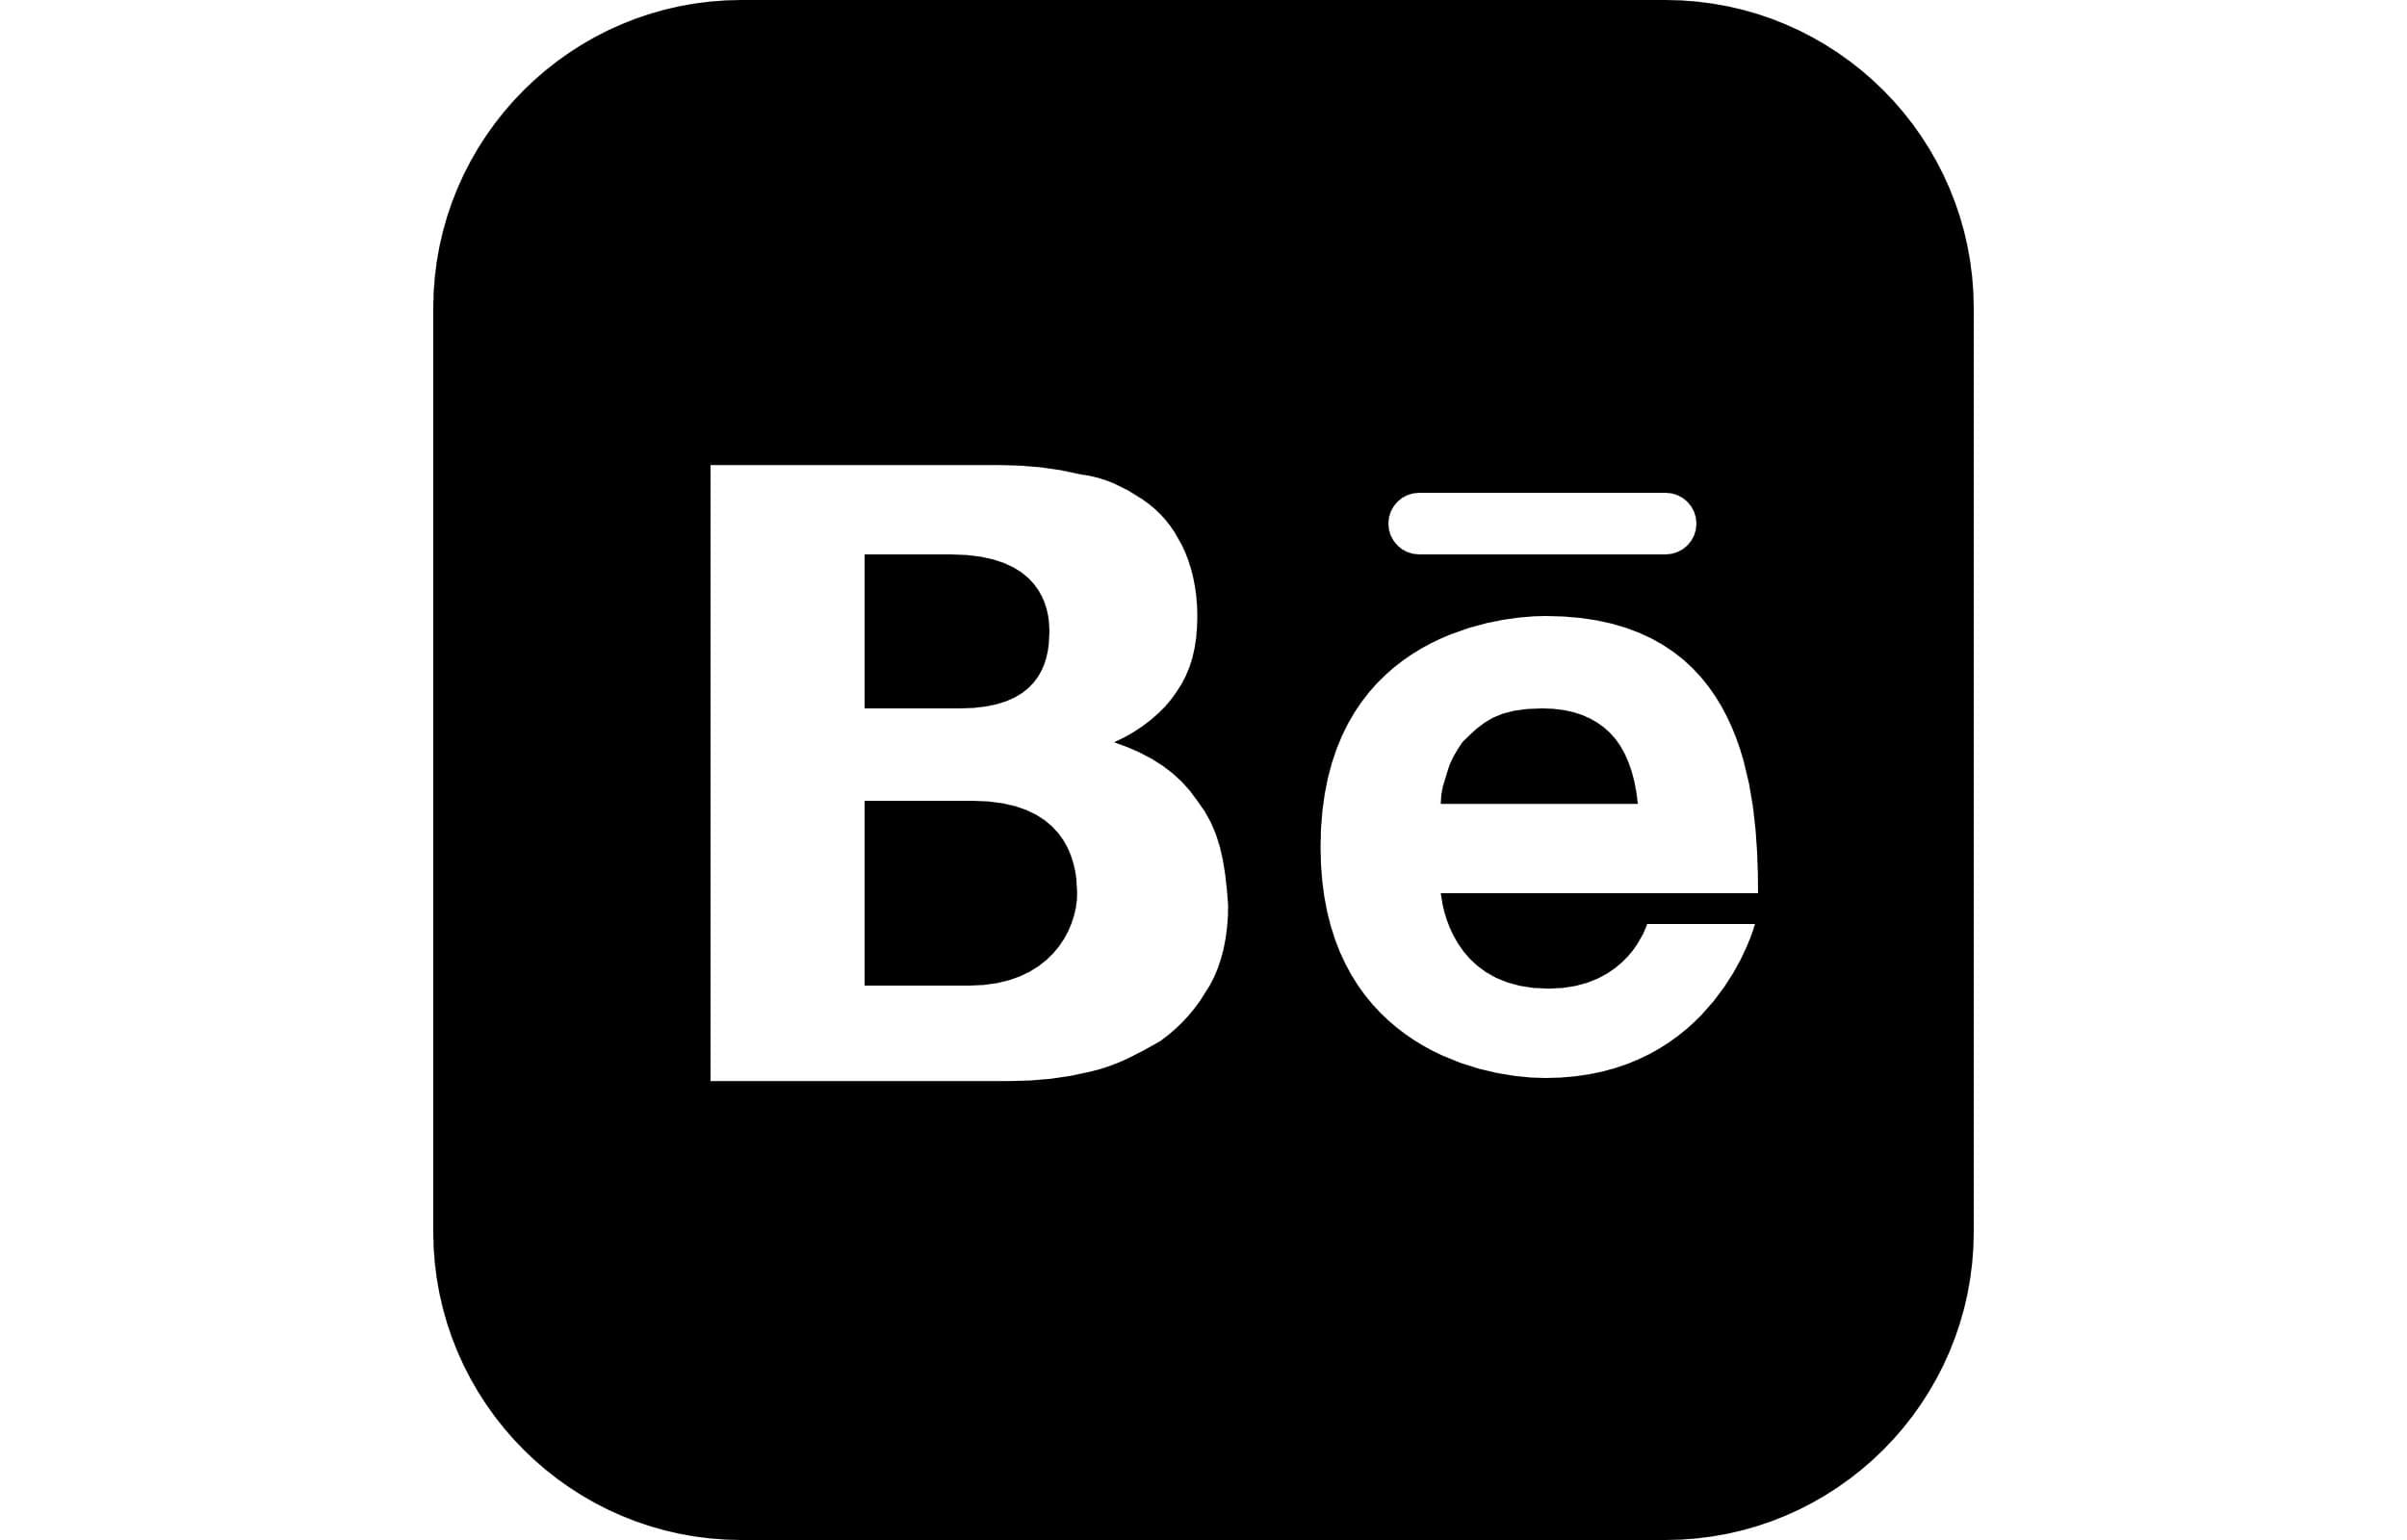 Behance logo and symbol, meaning, history, PNG